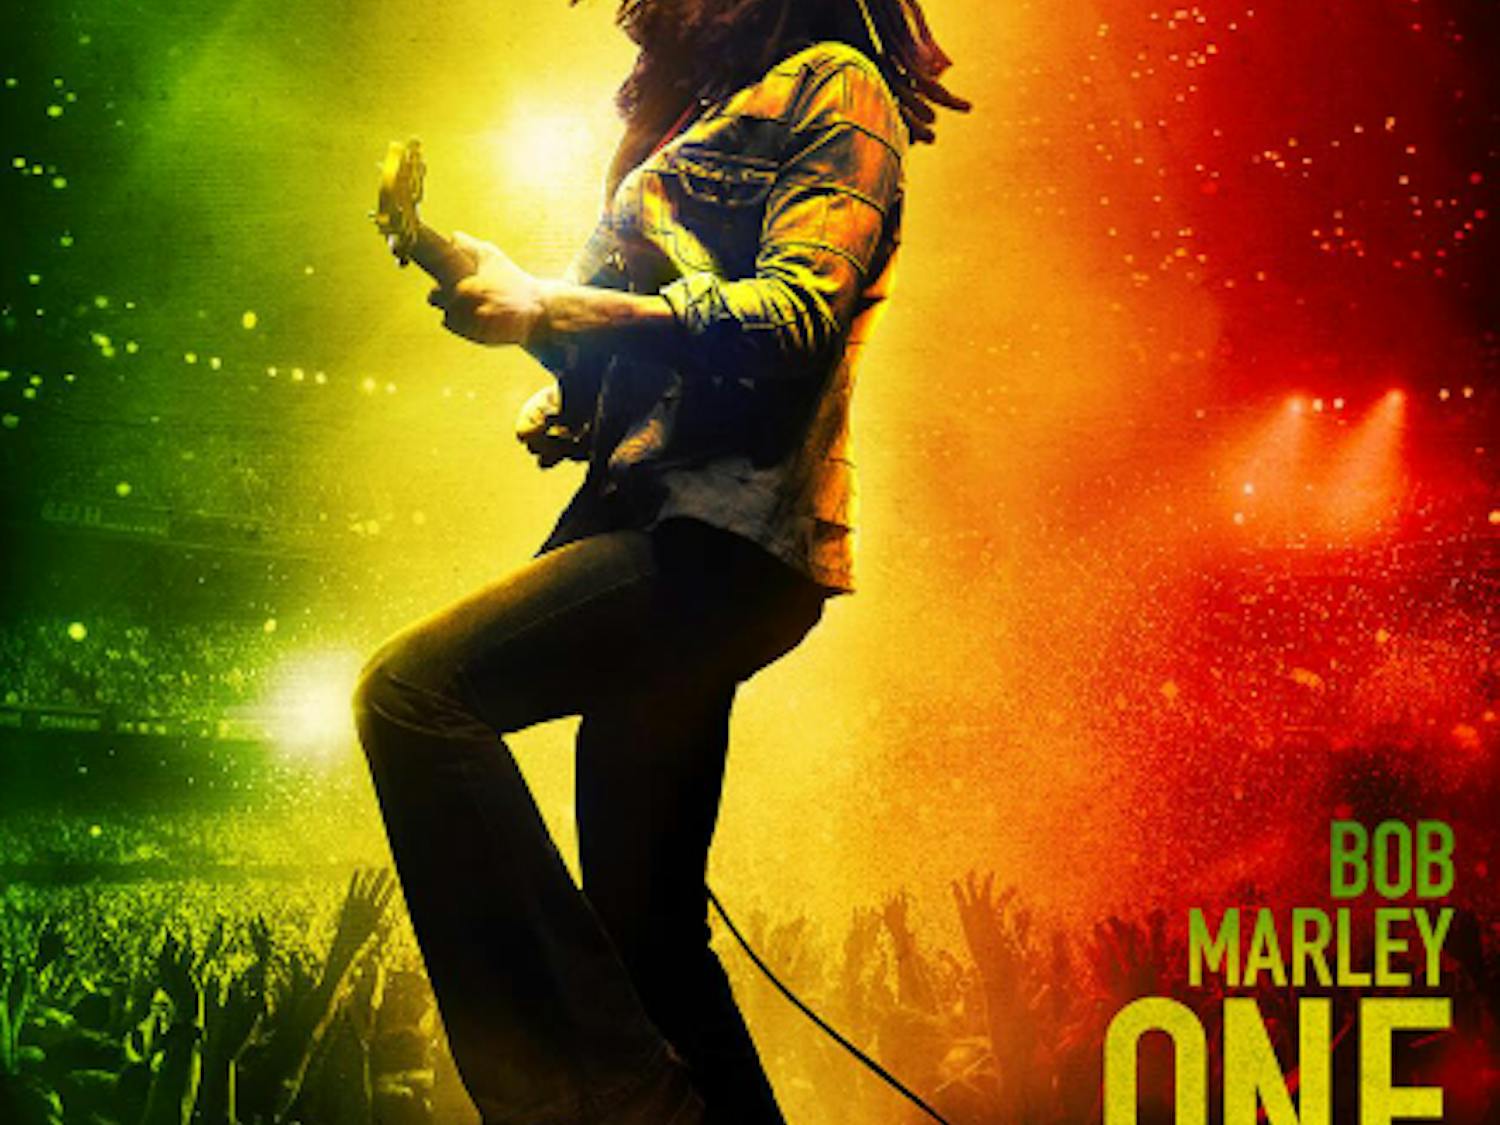 “Bob Marley: One Love” takes viewers on a non-linear journey of Marley’s life and career as a musician. (Photo courtesy of IMDB)